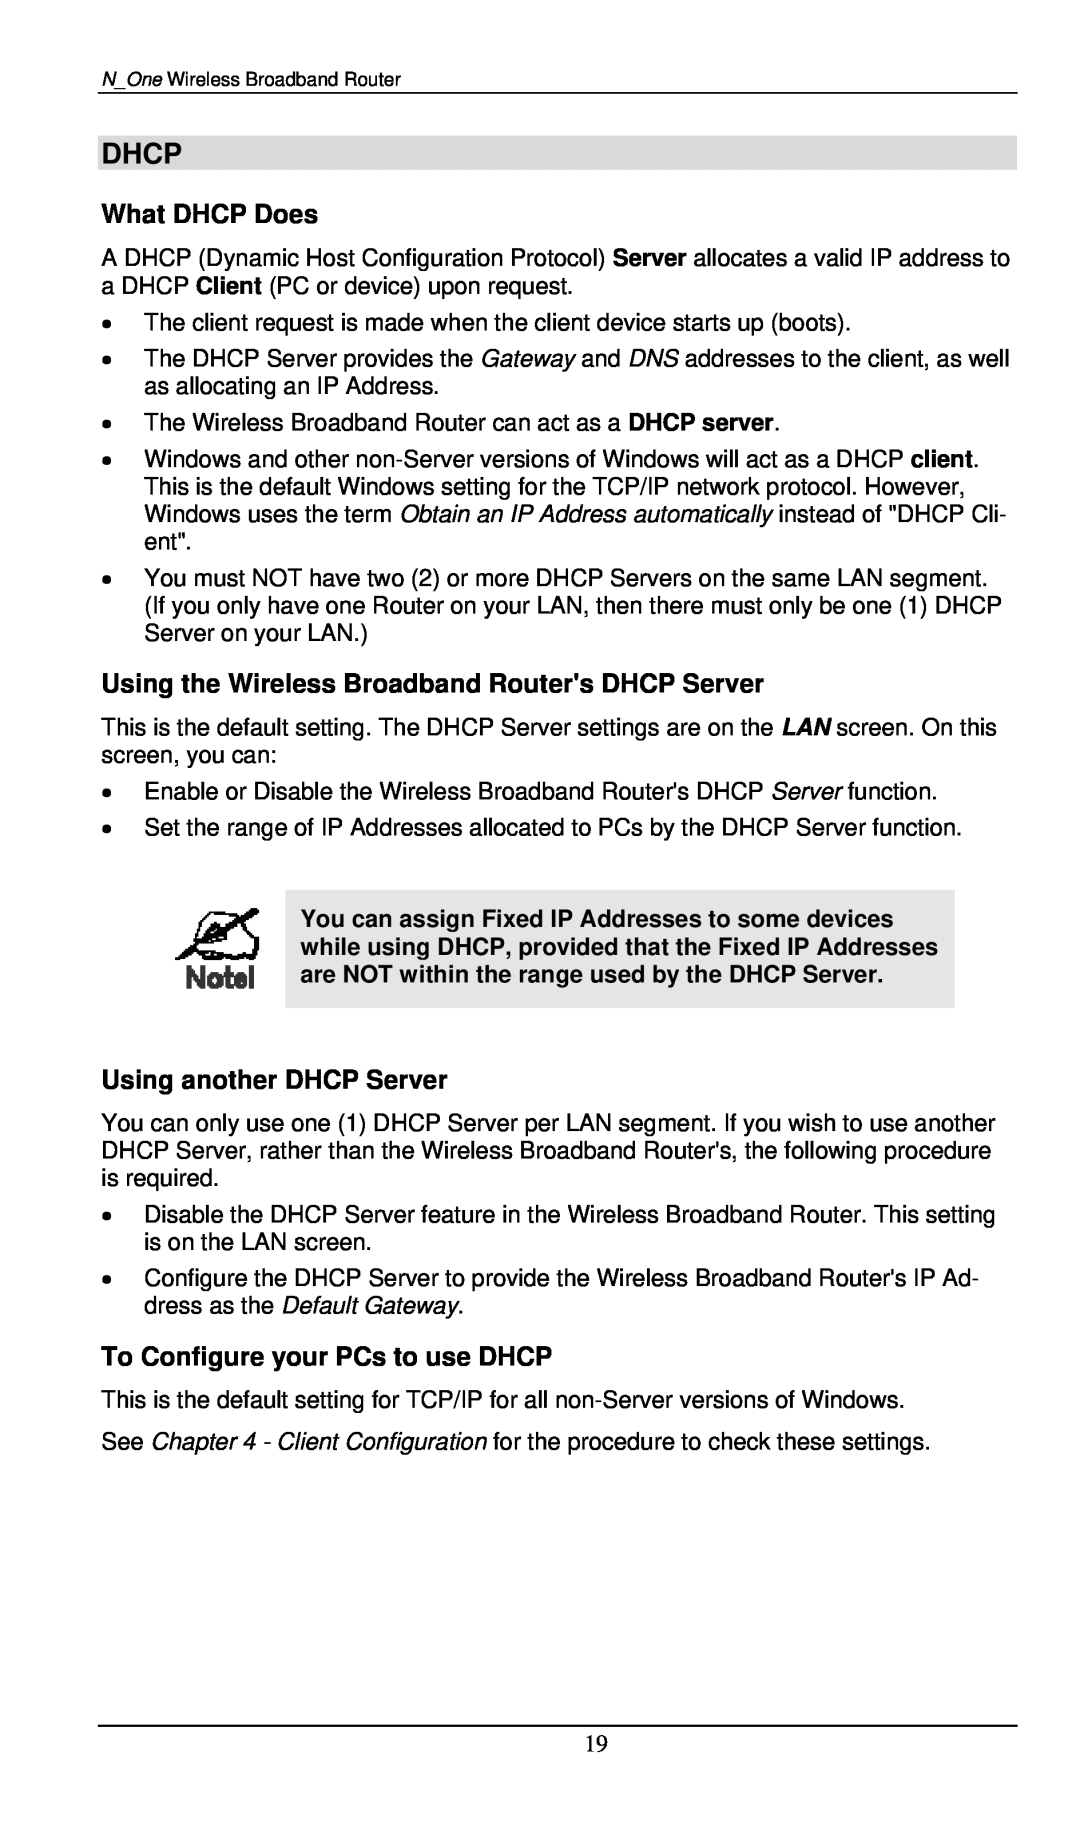 LevelOne WBR-6000 Dhcp, What DHCP Does, Using the Wireless Broadband Routers DHCP Server, Using another DHCP Server 